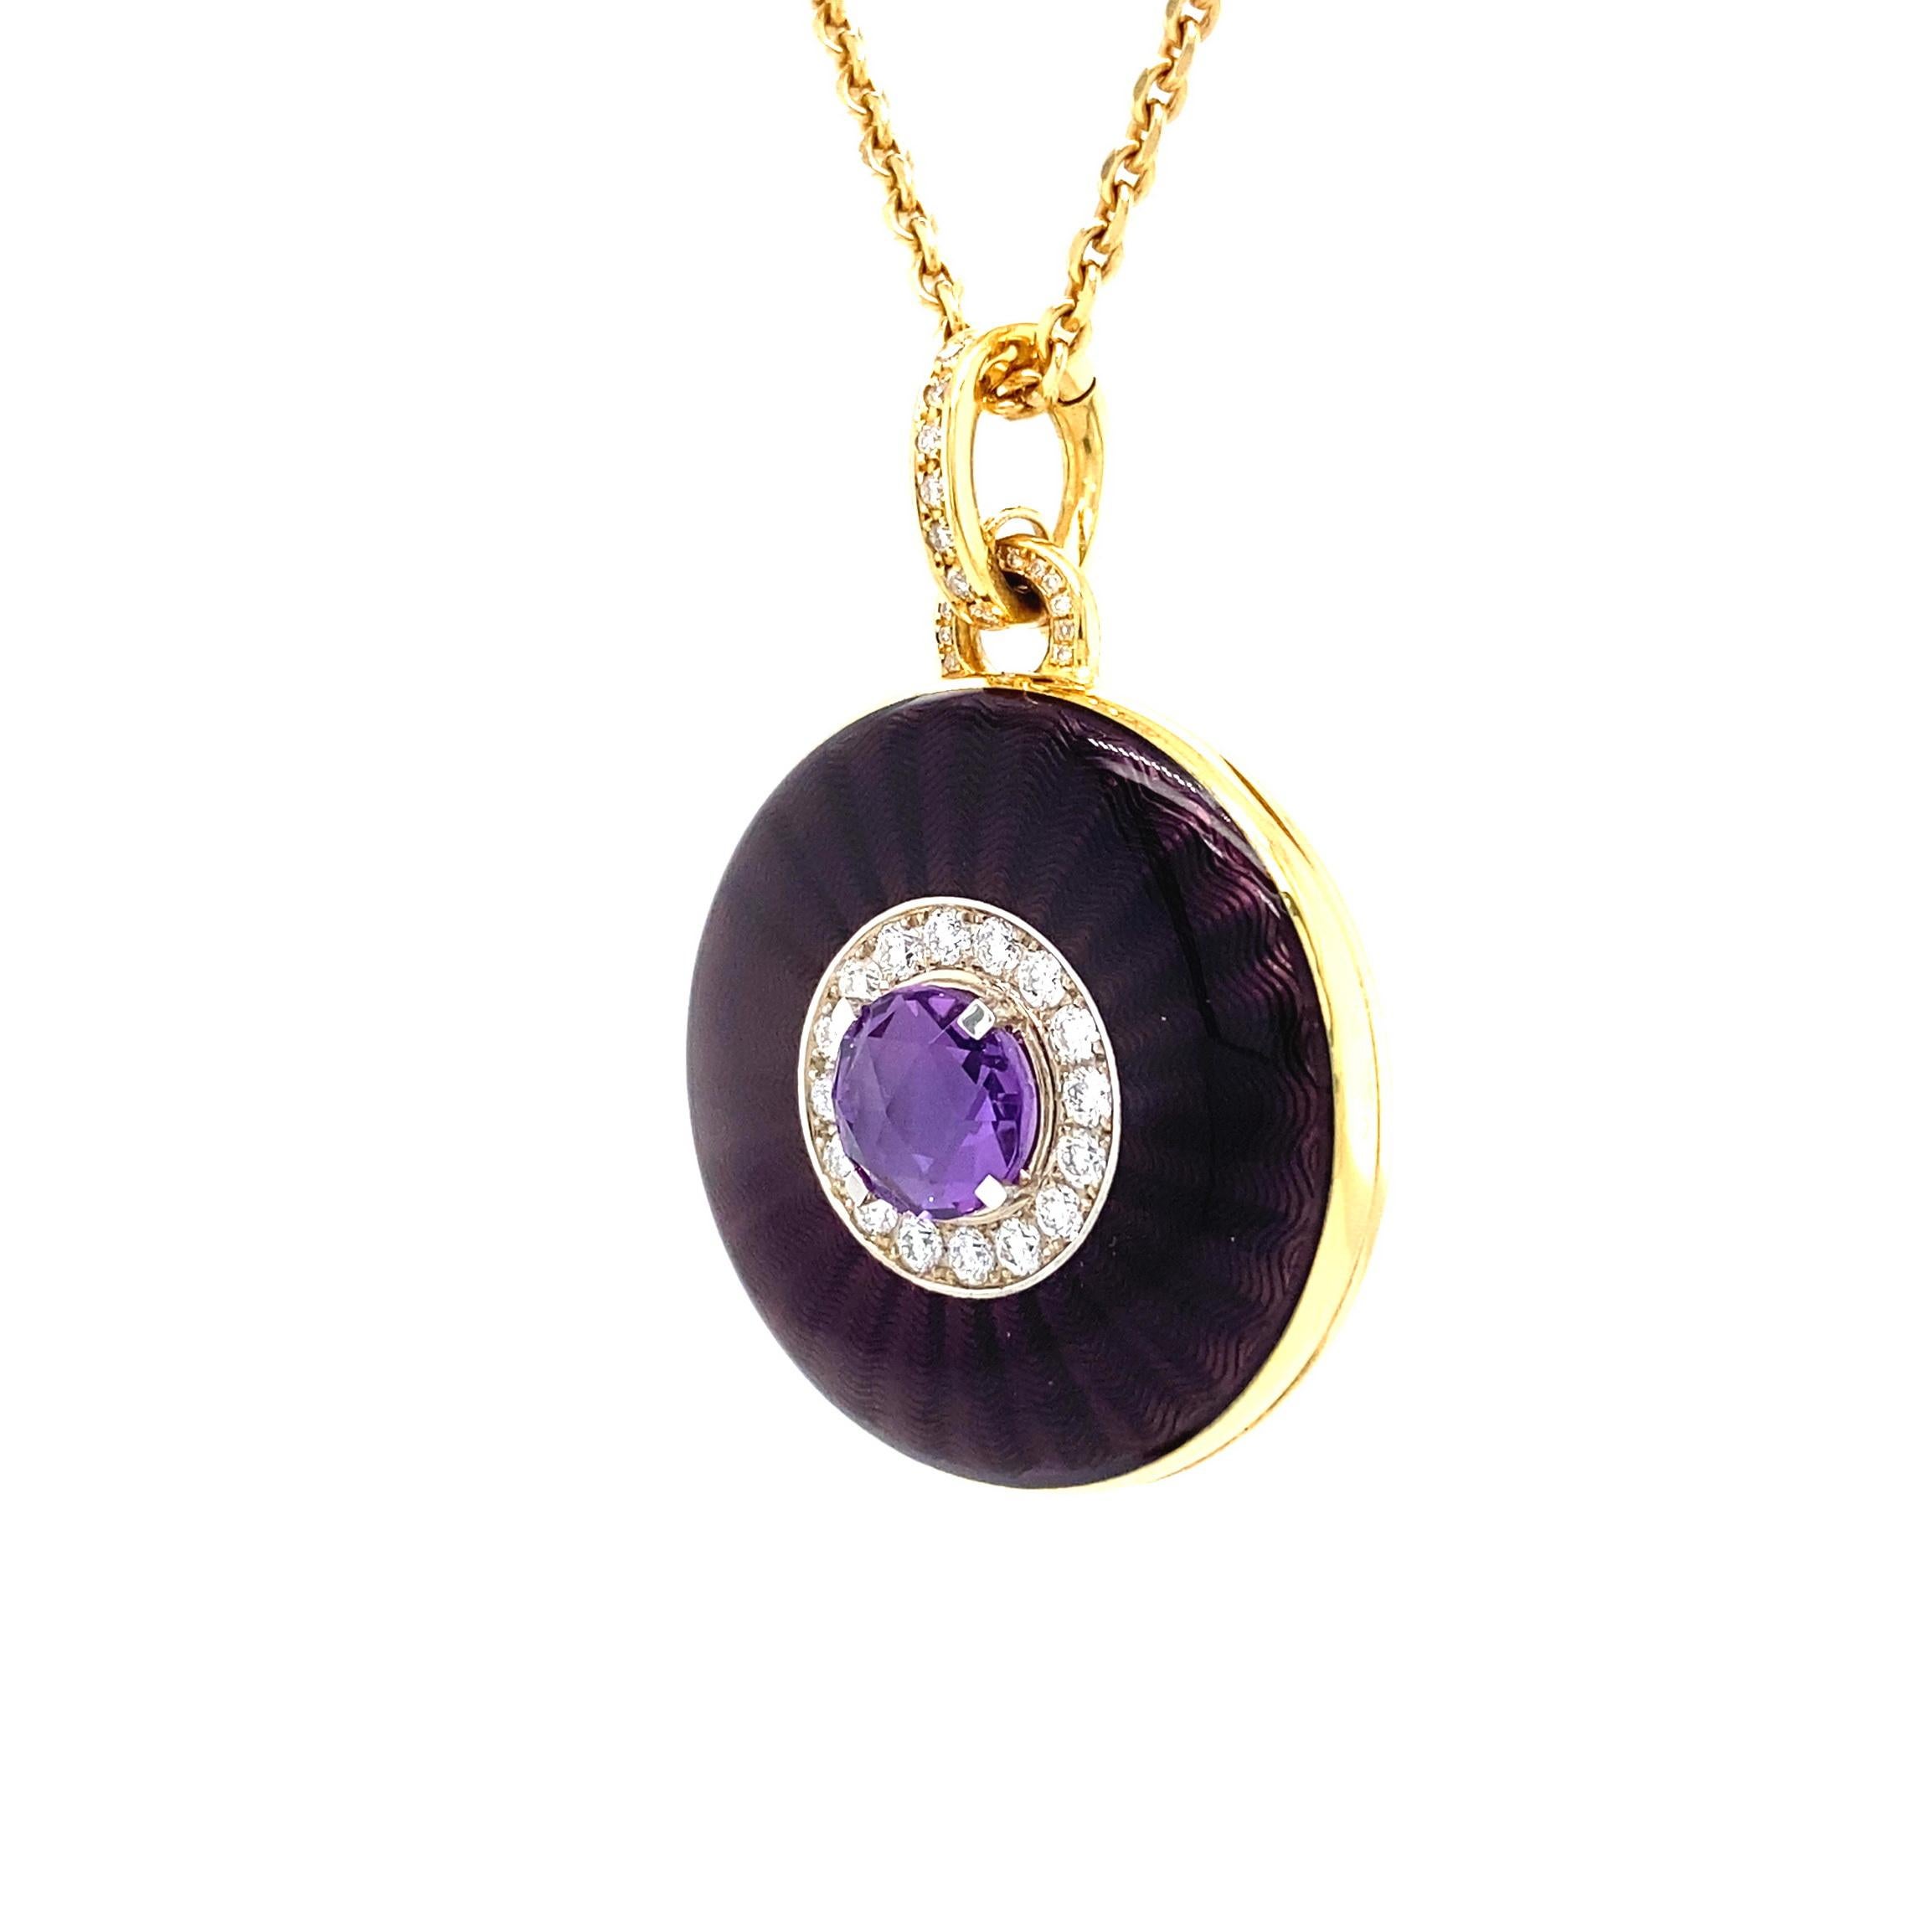 Victor Mayer customizable round locket pendant 18k yellow gold and white gold, Opera Collection, translucent purple vitreous enamel, guilloche, 37 diamonds, total 0.37 ct, G VS, brilliant cut, 1 amethyst, diameter app. 26.0 mm

About the creator